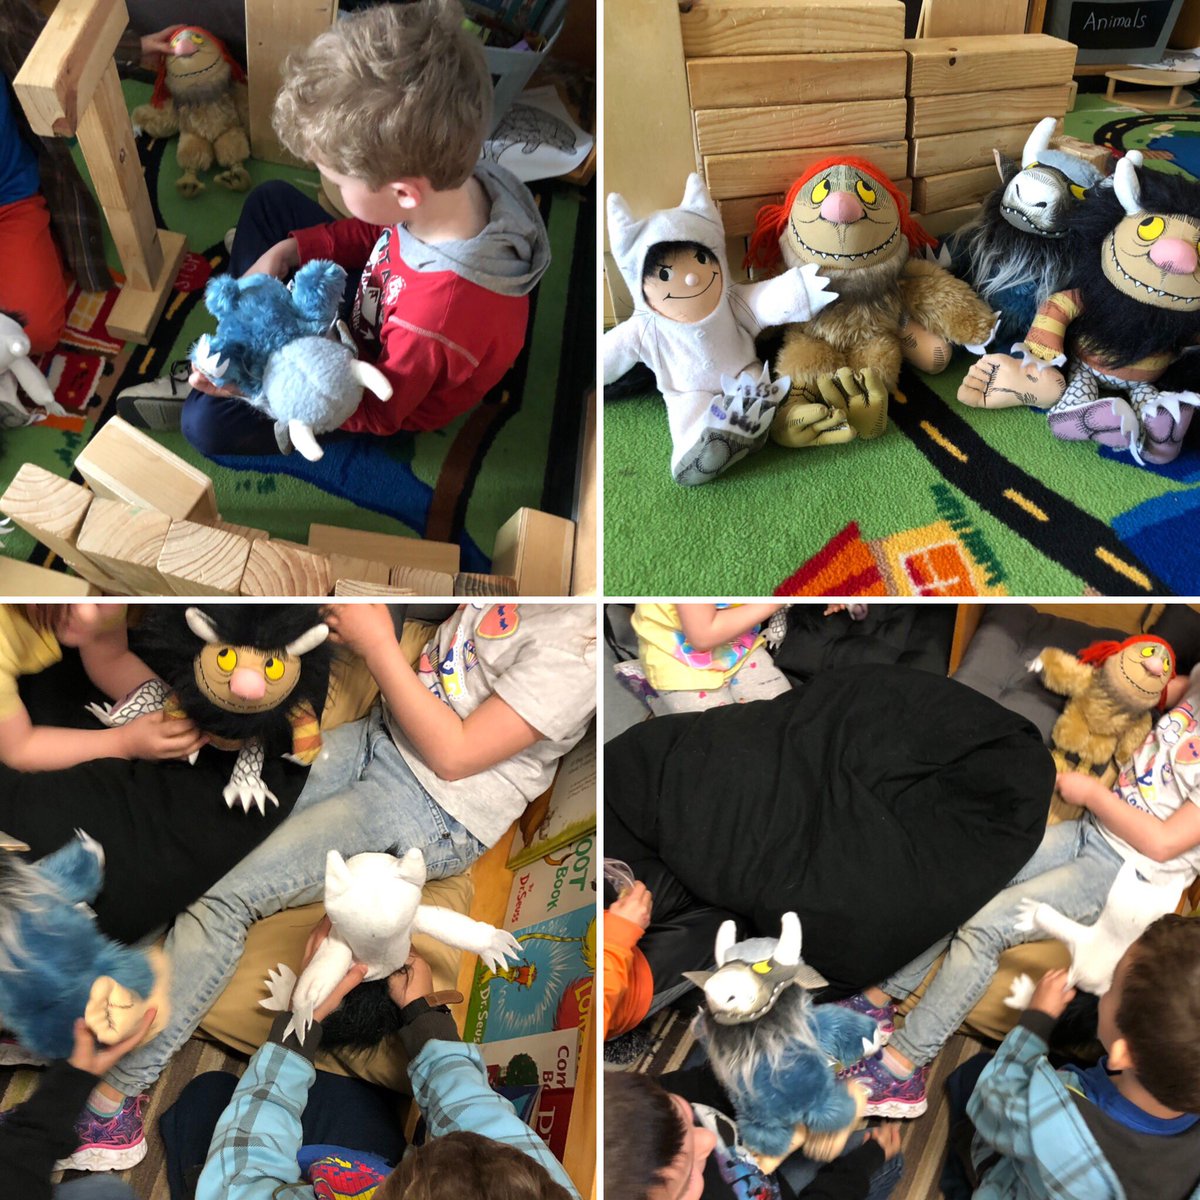 Where the Wild Things Are. Cross-curricular learning about this classic story. #zonesofregulation #executivefunctions #literacy #handonmath #capacity #art #learningthroughplay #adventuresingradeone #tldsblearns Thank you @TLDSBresources for this amazing kit. @QueenVic_PS @TLDSB